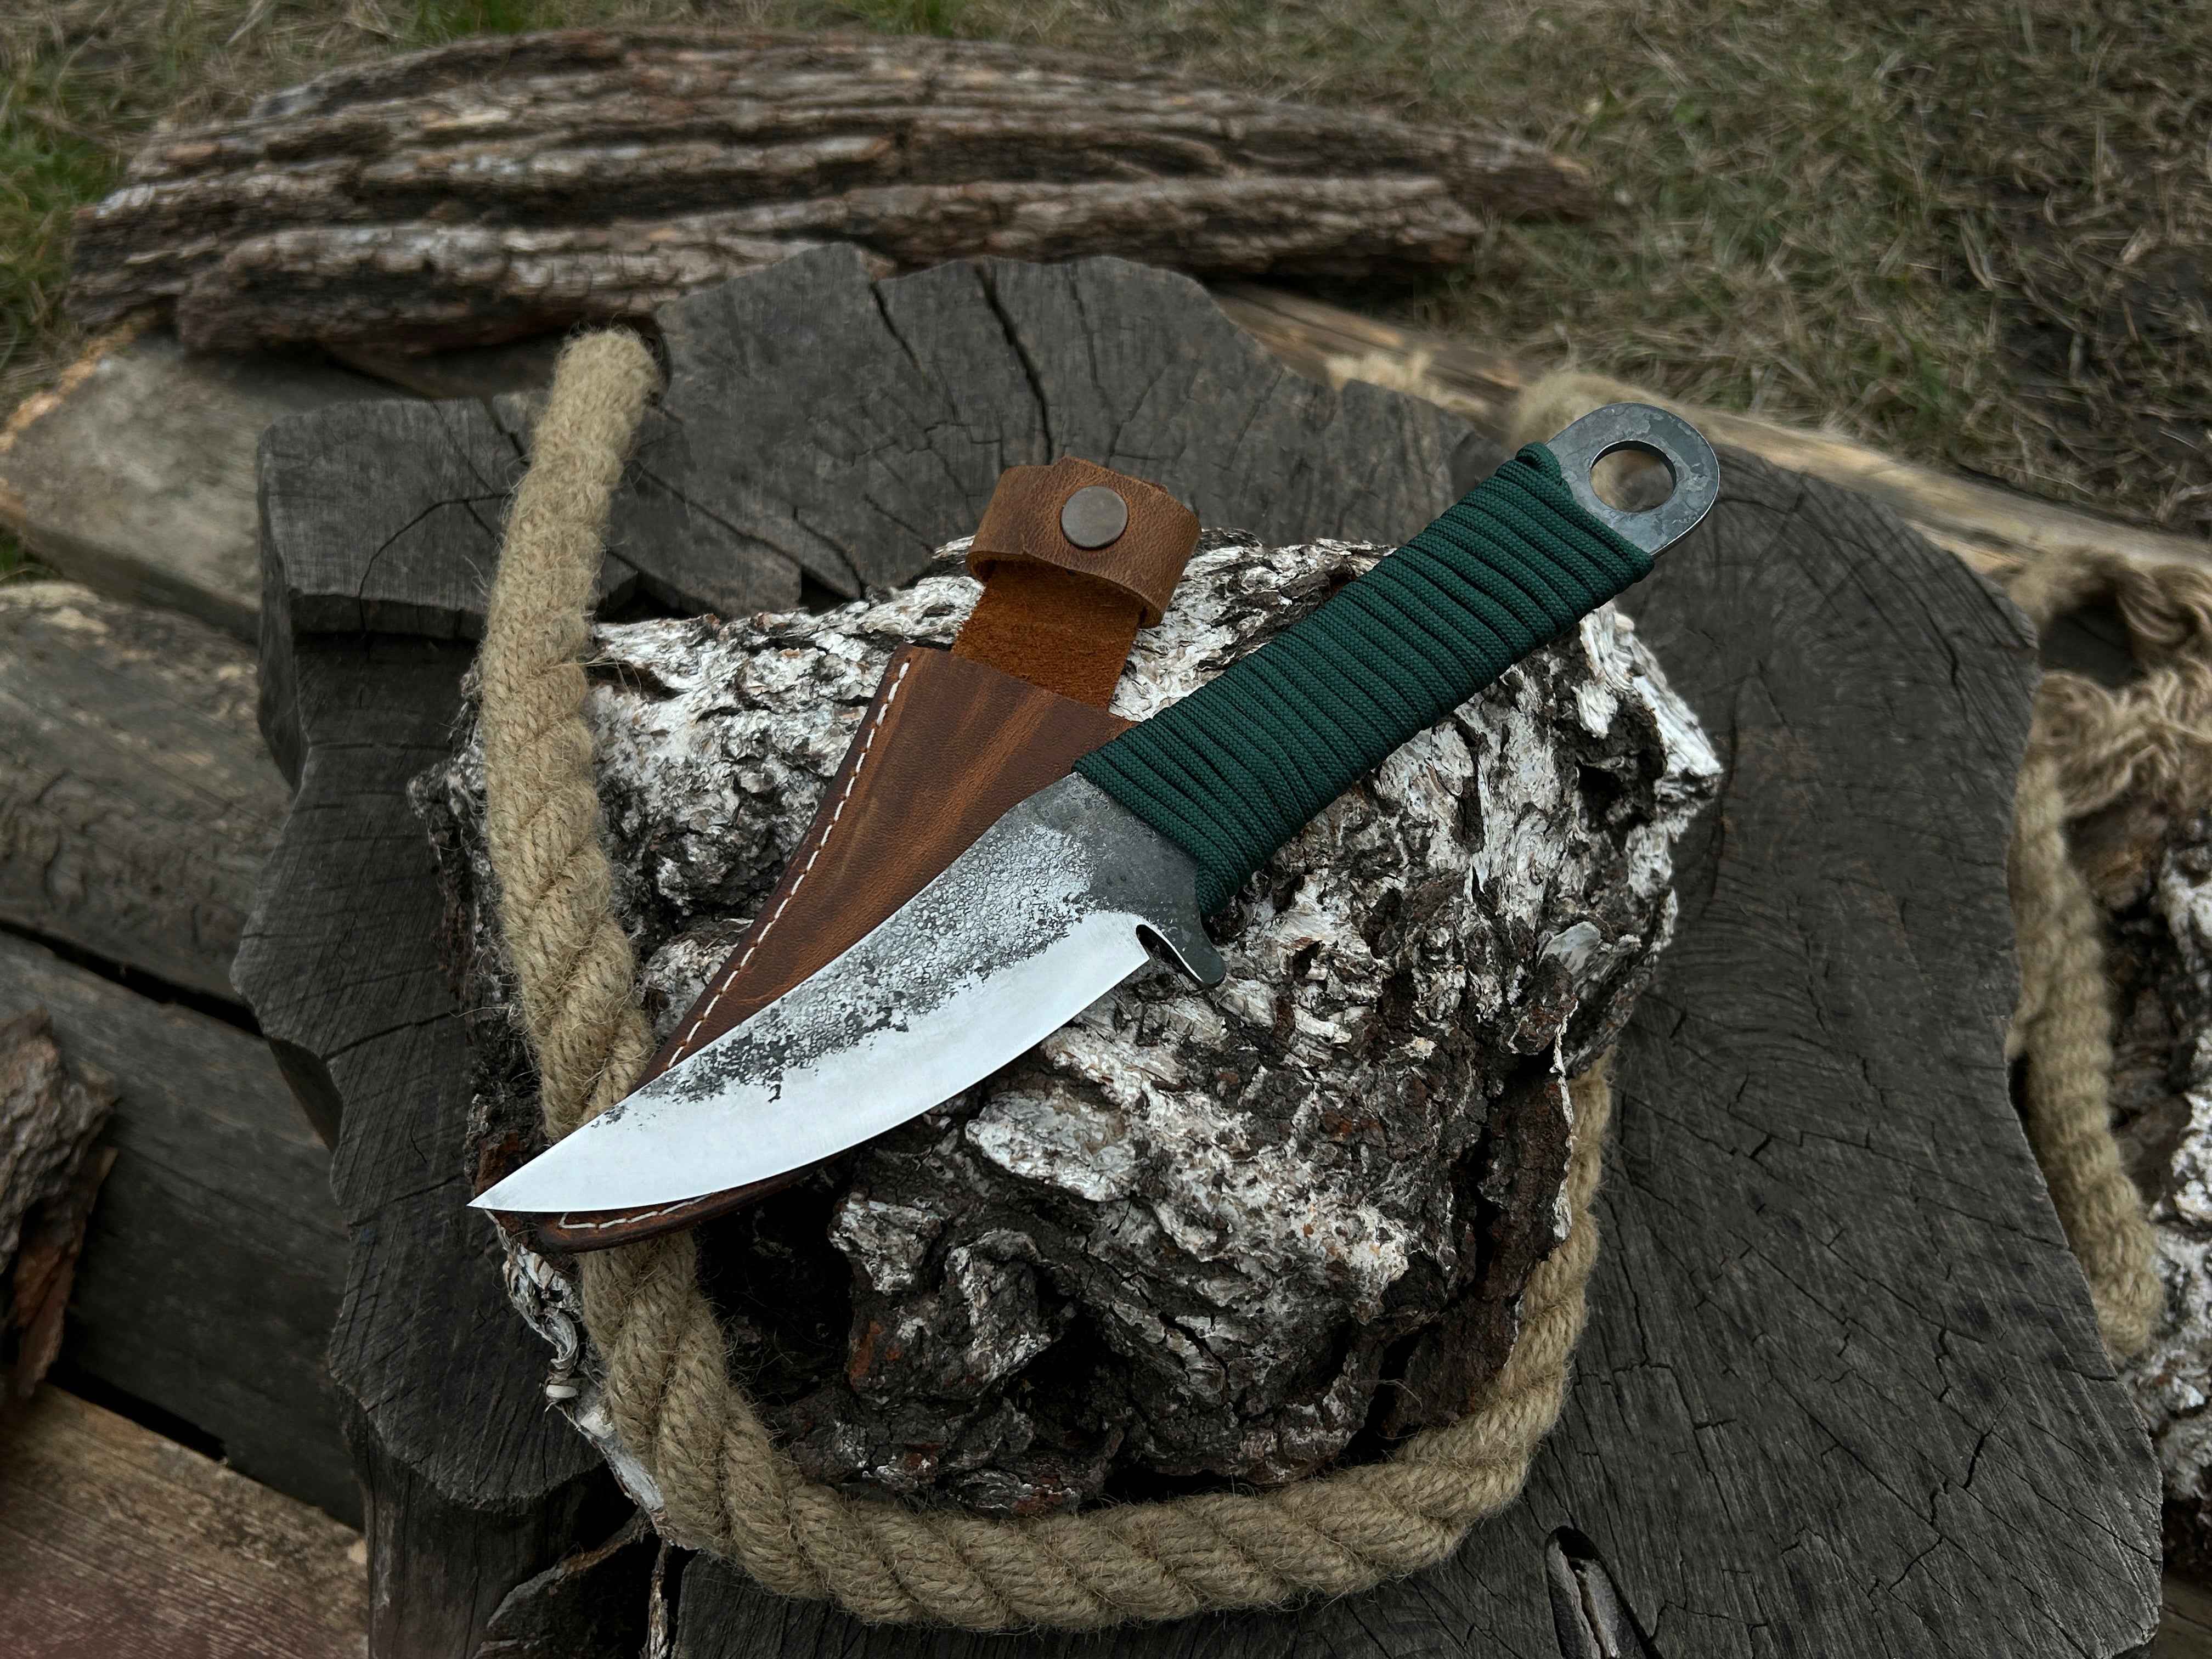 Hand-Forged Throwing Knife, Total Length - 25.5 cm (10 inches)